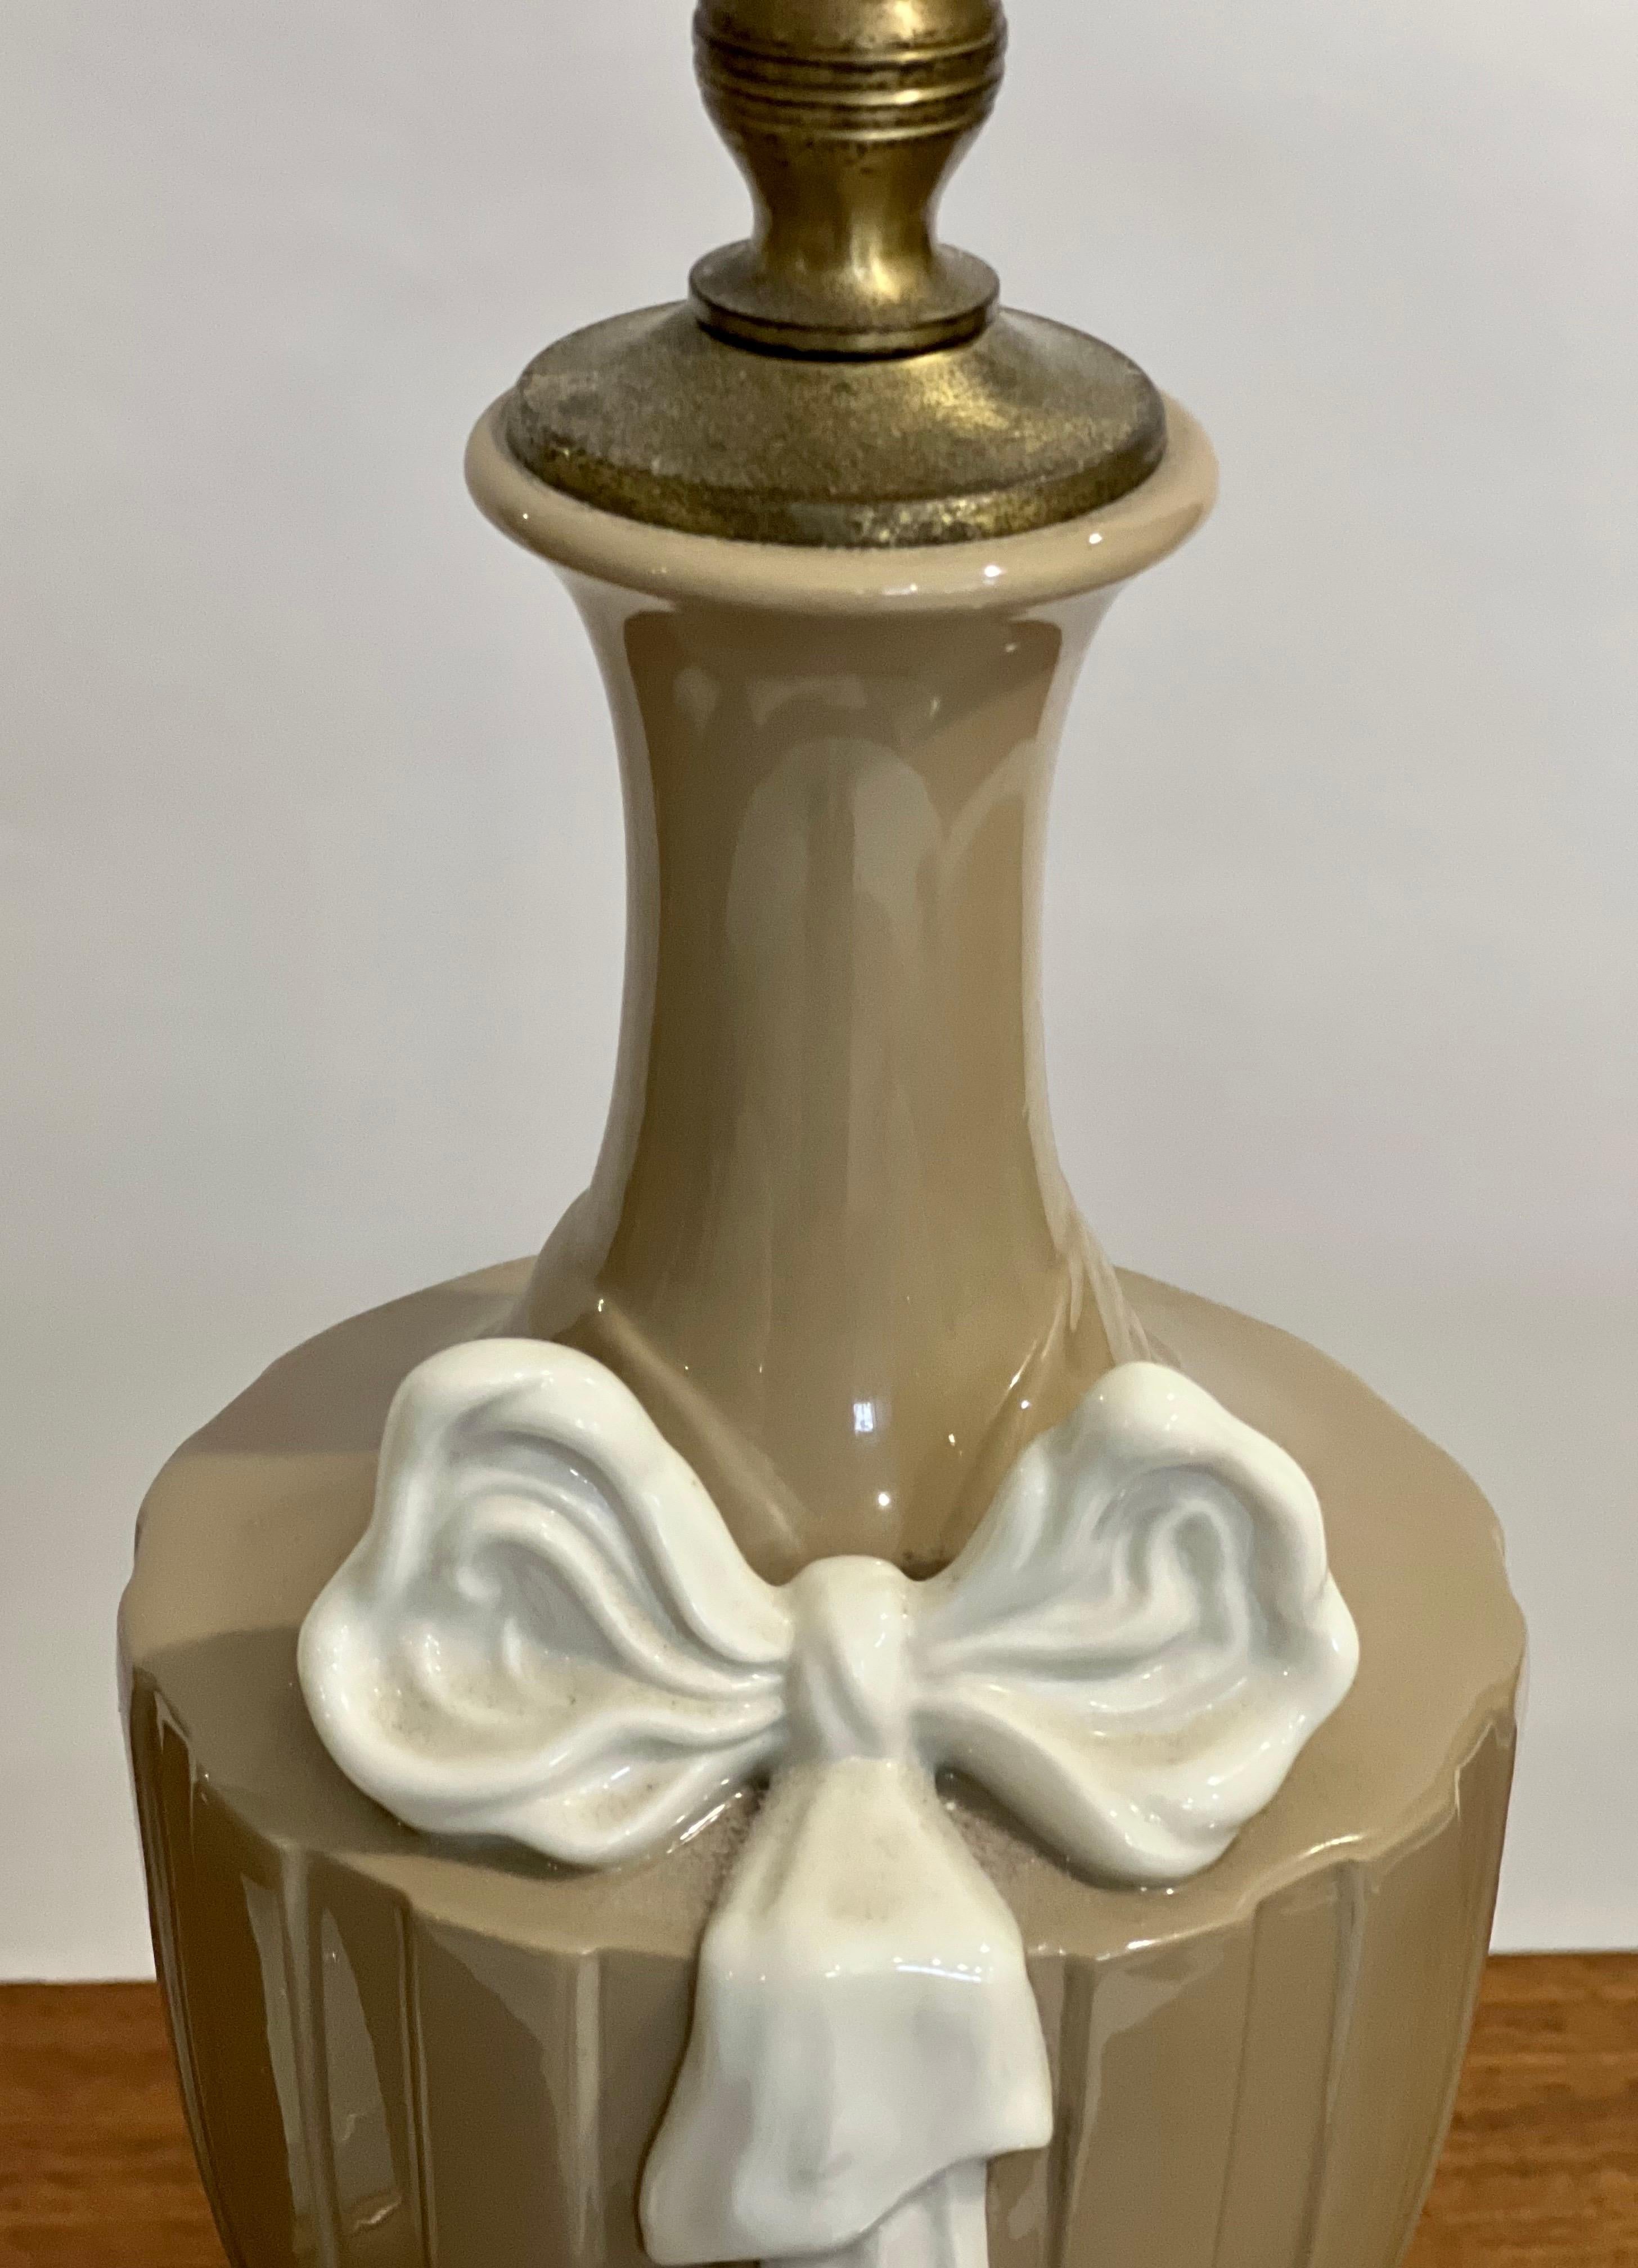 20th Century Lenox Porcelain Lamps in Taupe and White by Dav Art, NY, Pair For Sale 1